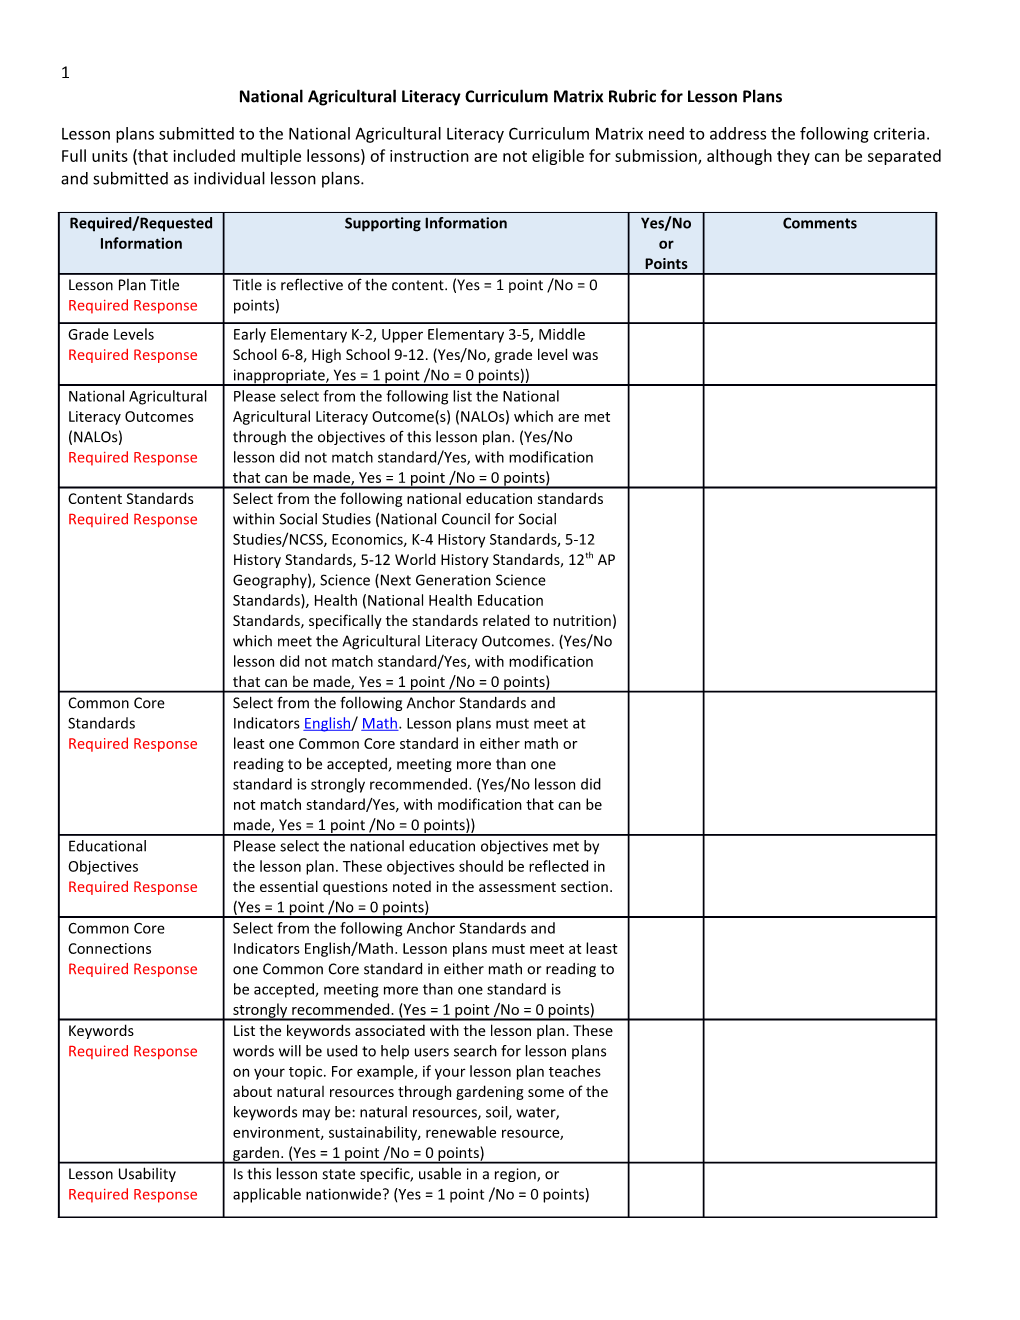 National Agricultural Literacy Curriculum Matrix Rubric for Lesson Plans